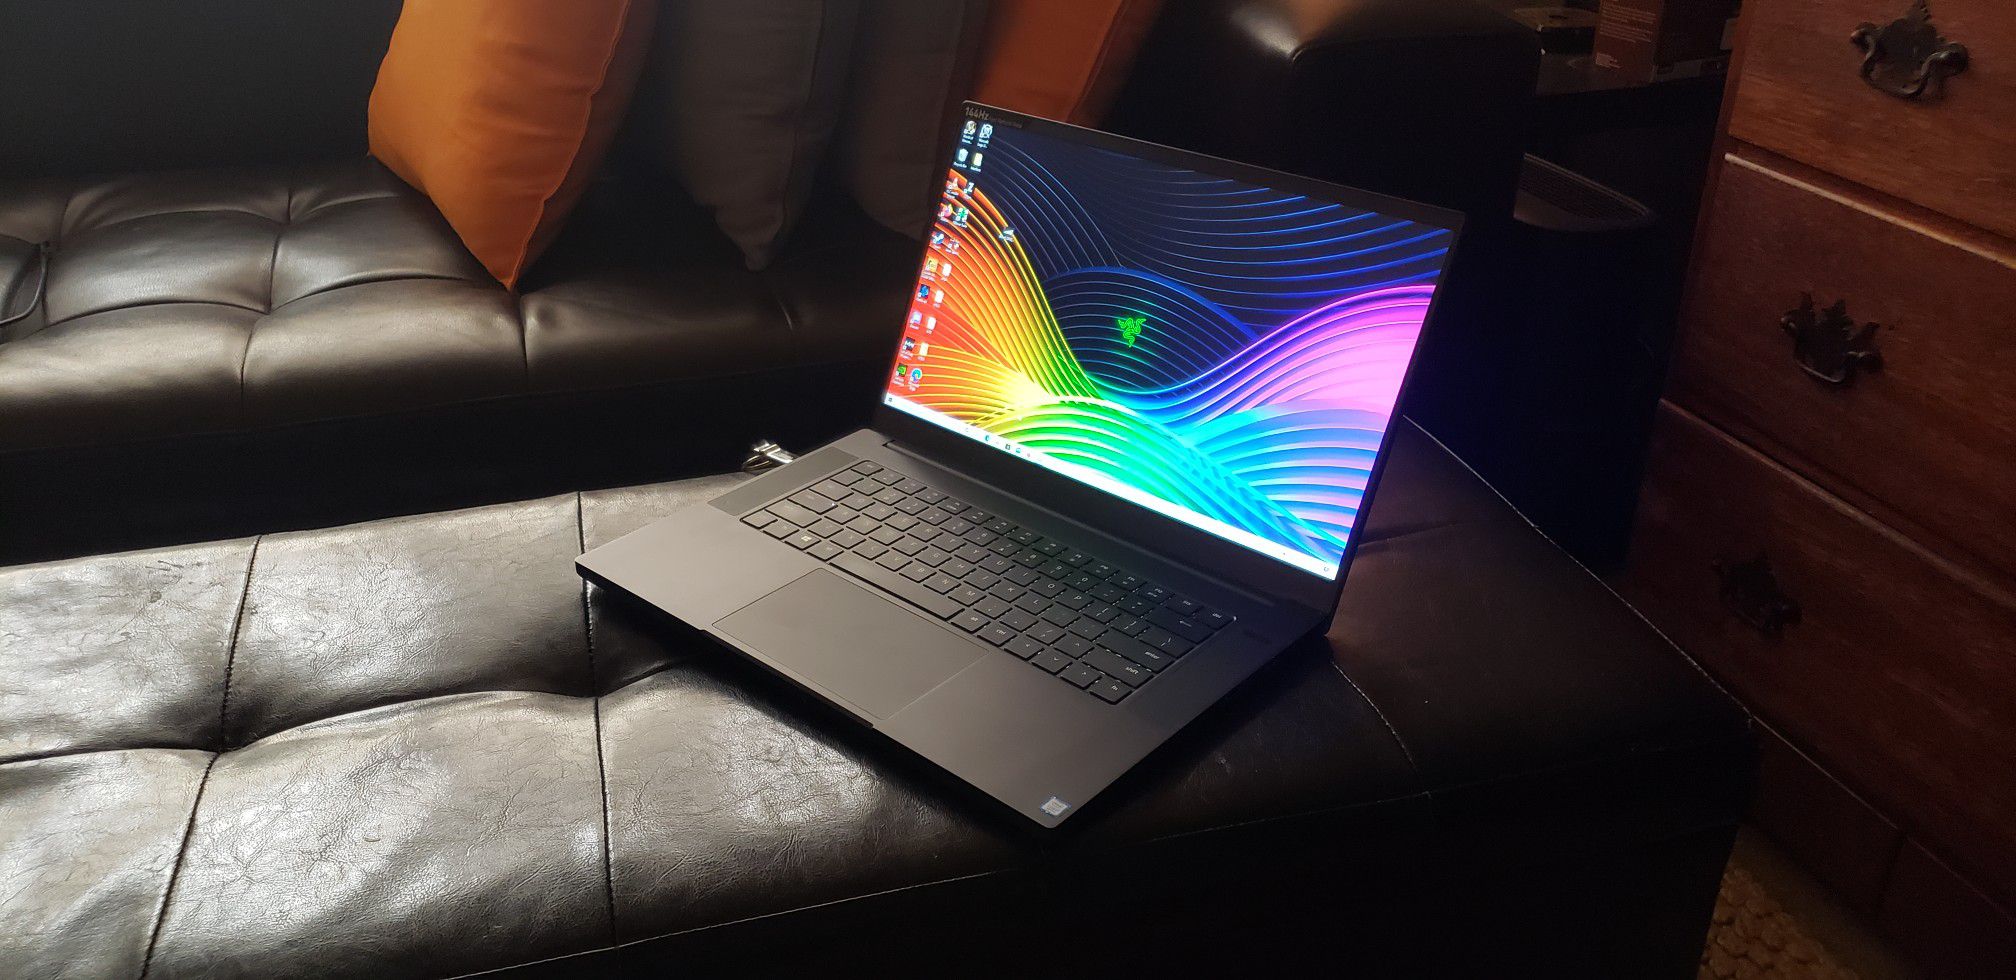 (barely used) - 144hz Razer Blade 15 Gaming Laptop - GeForce RTX 2060 6gb - Core i7-9750H (fastest version of CPU)